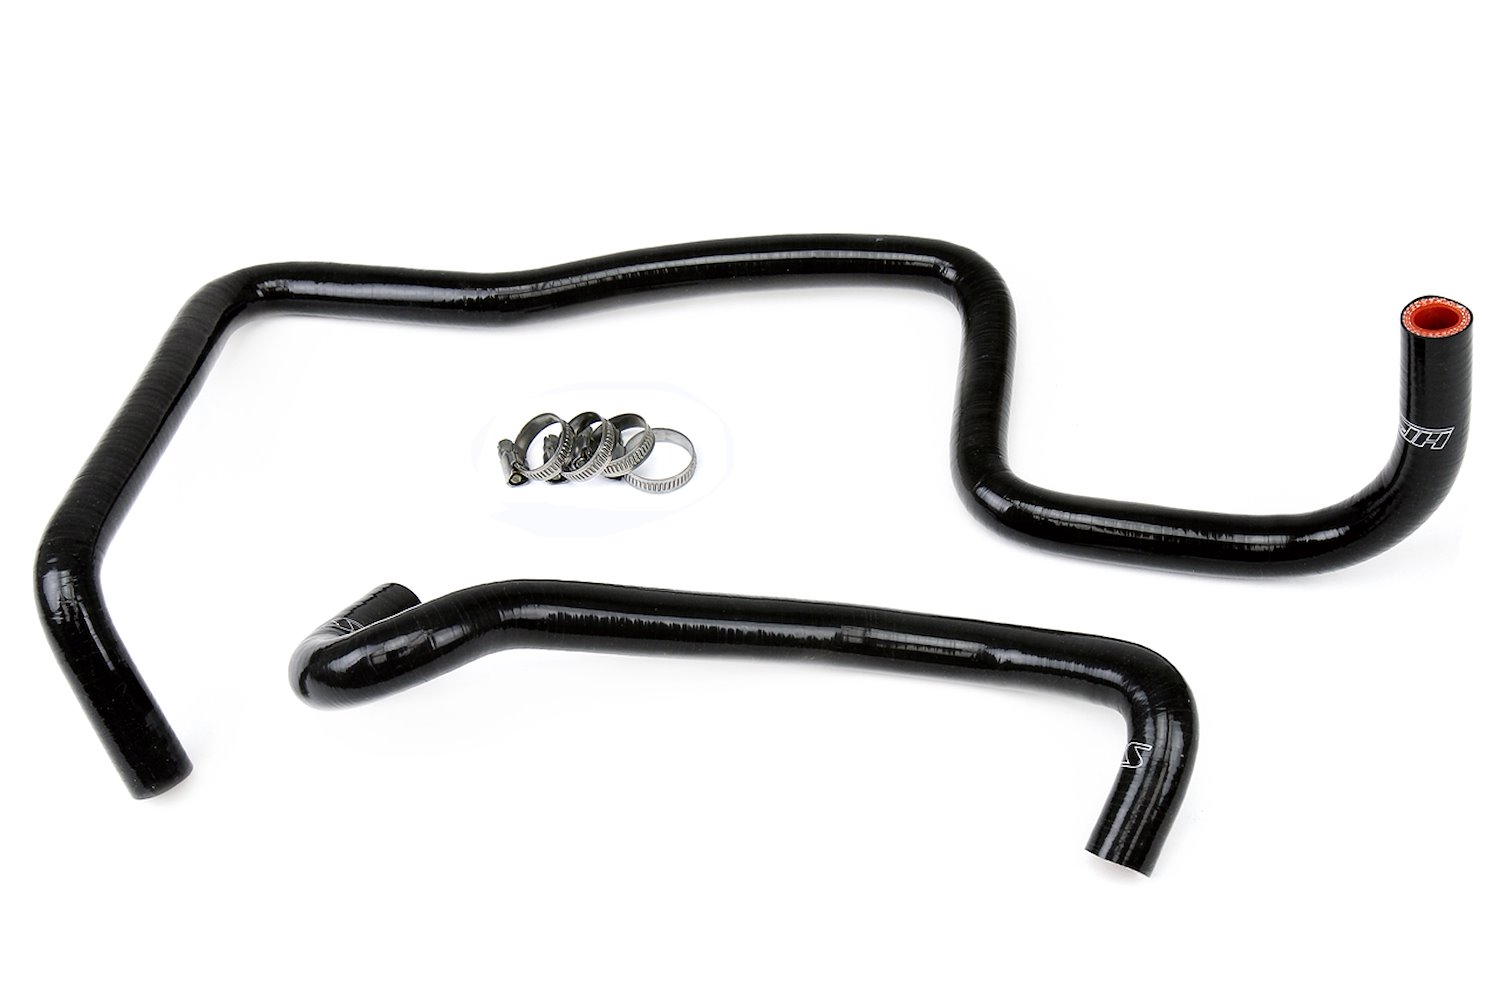 57-1471-BLK Heater Hose Kit, High-Temp 3-Ply Reinforced Silicone, Replace OEM Rubber Heater Coolant Hoses